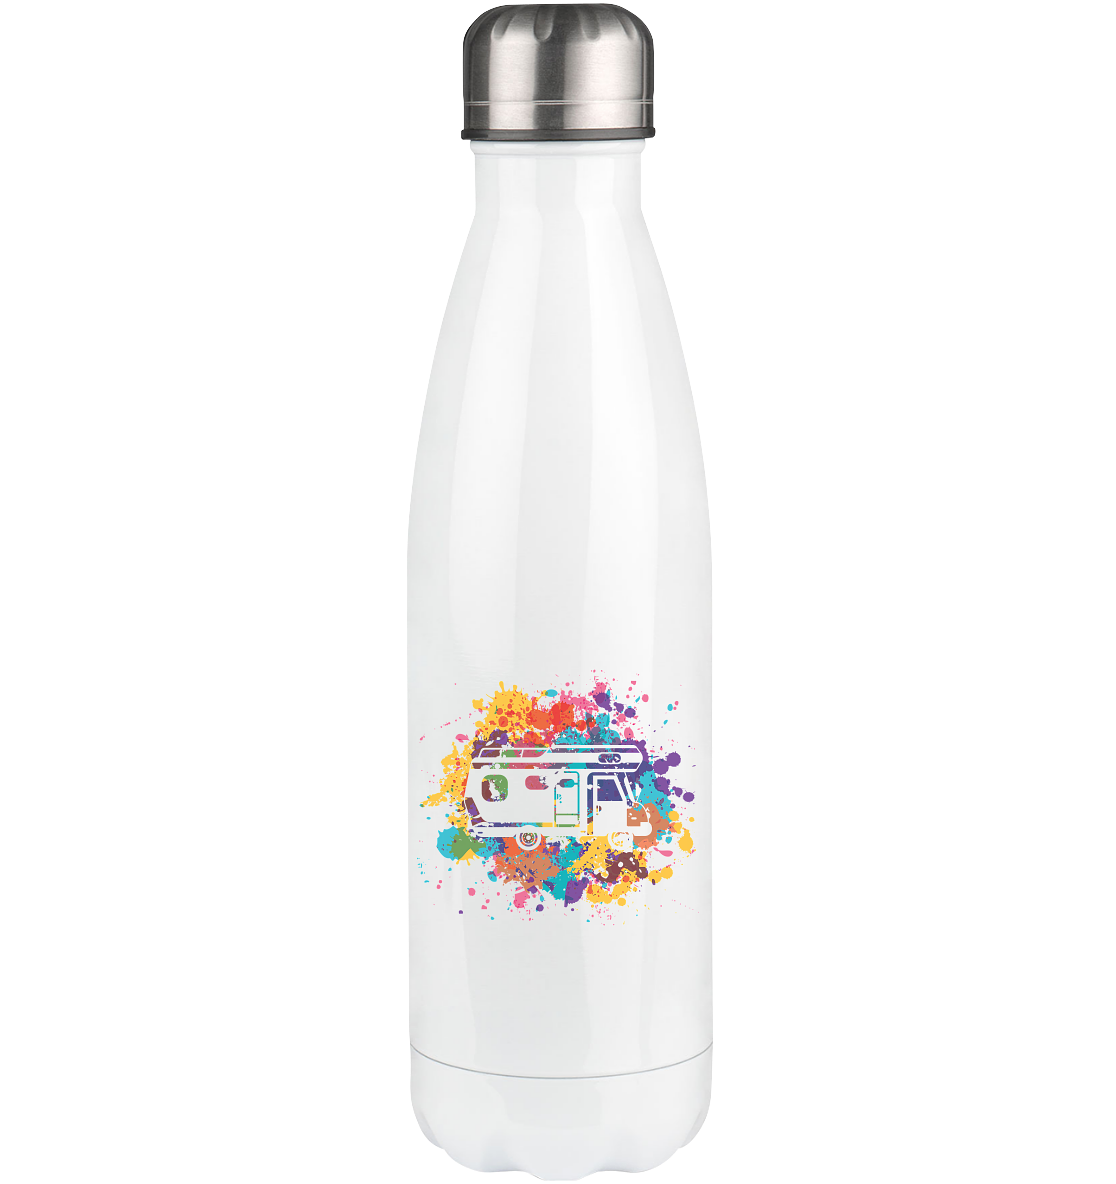 Colorful Splash and Camping - Edelstahl Thermosflasche camping UONP 500ml